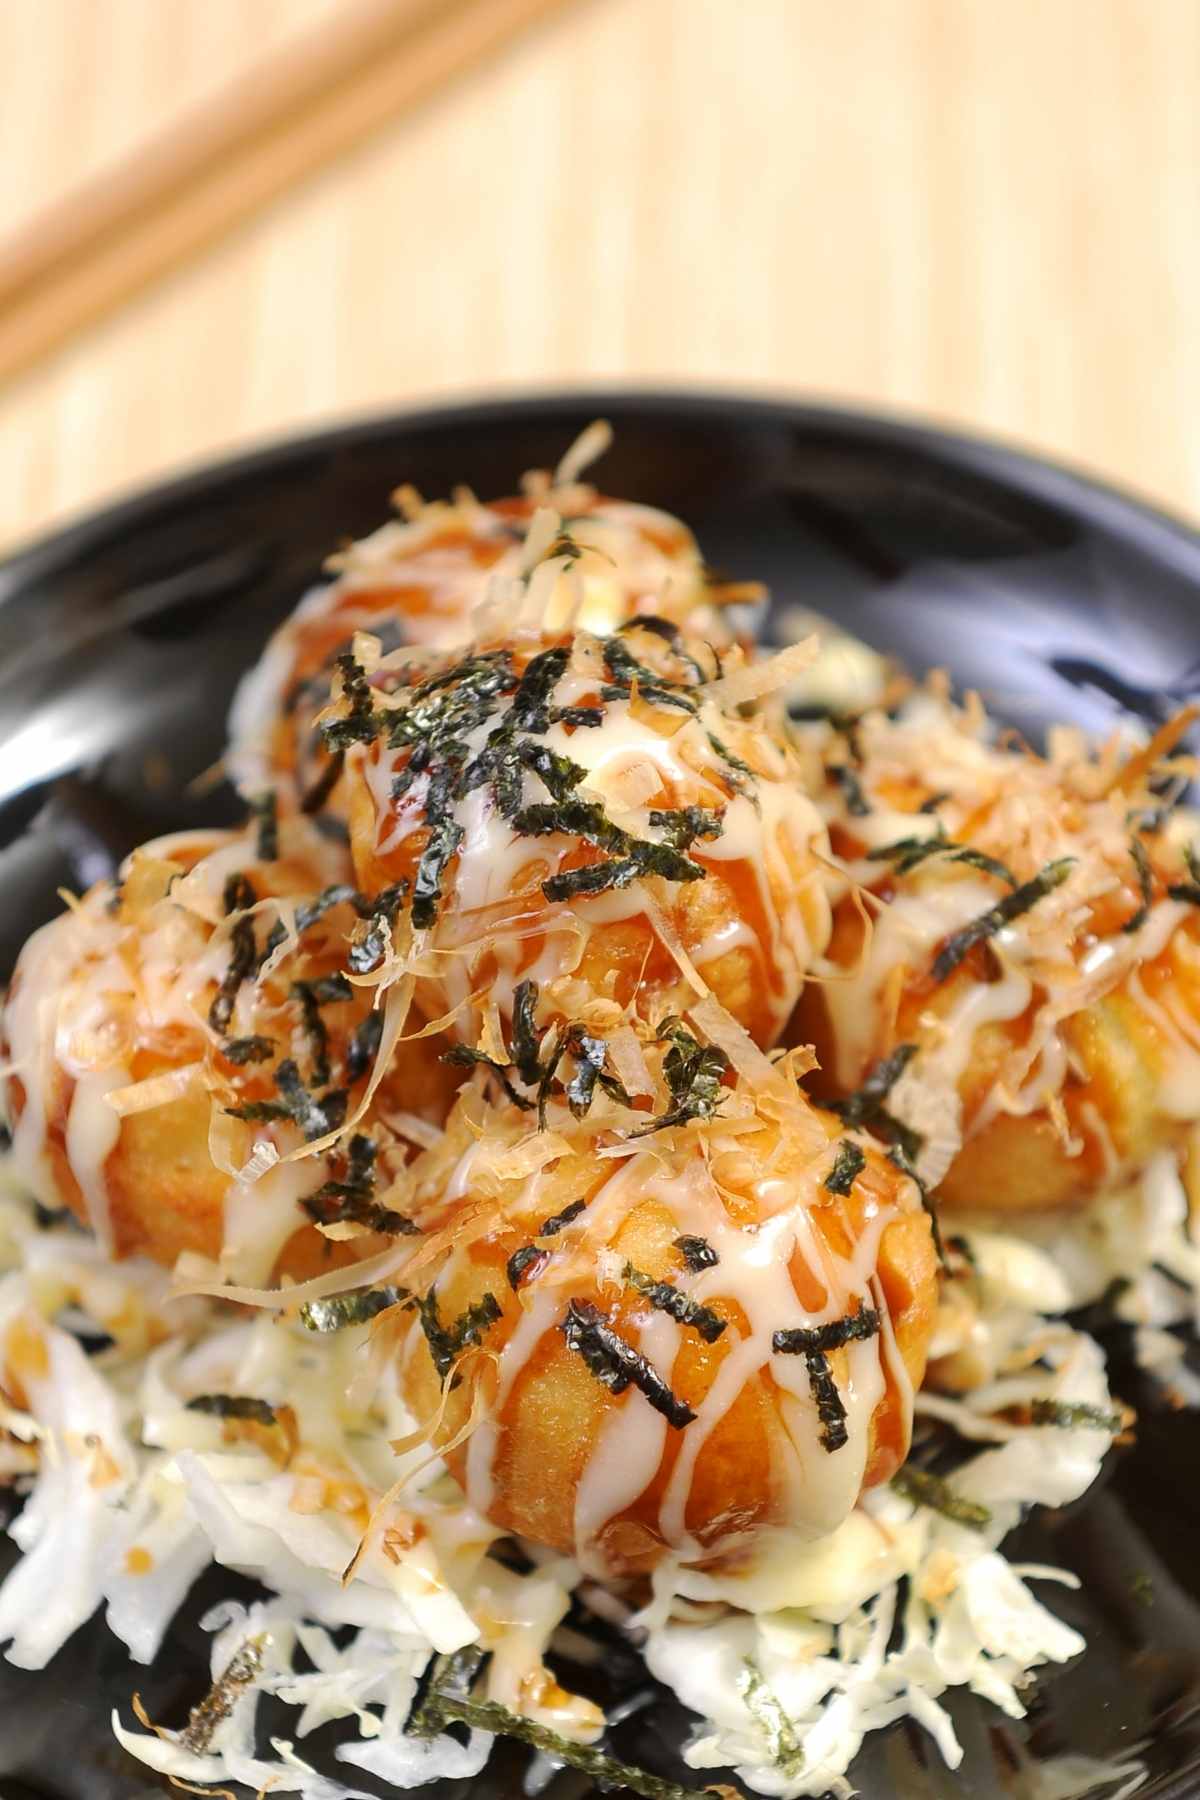 Octopus Balls (also known as Takoyaki) are small dumplings with a tender chunk of octopus in the center. It has a crispy outer layer and a tender, juicy filling. This well-known Japanese street food has a unique taste and is fun to prepare!